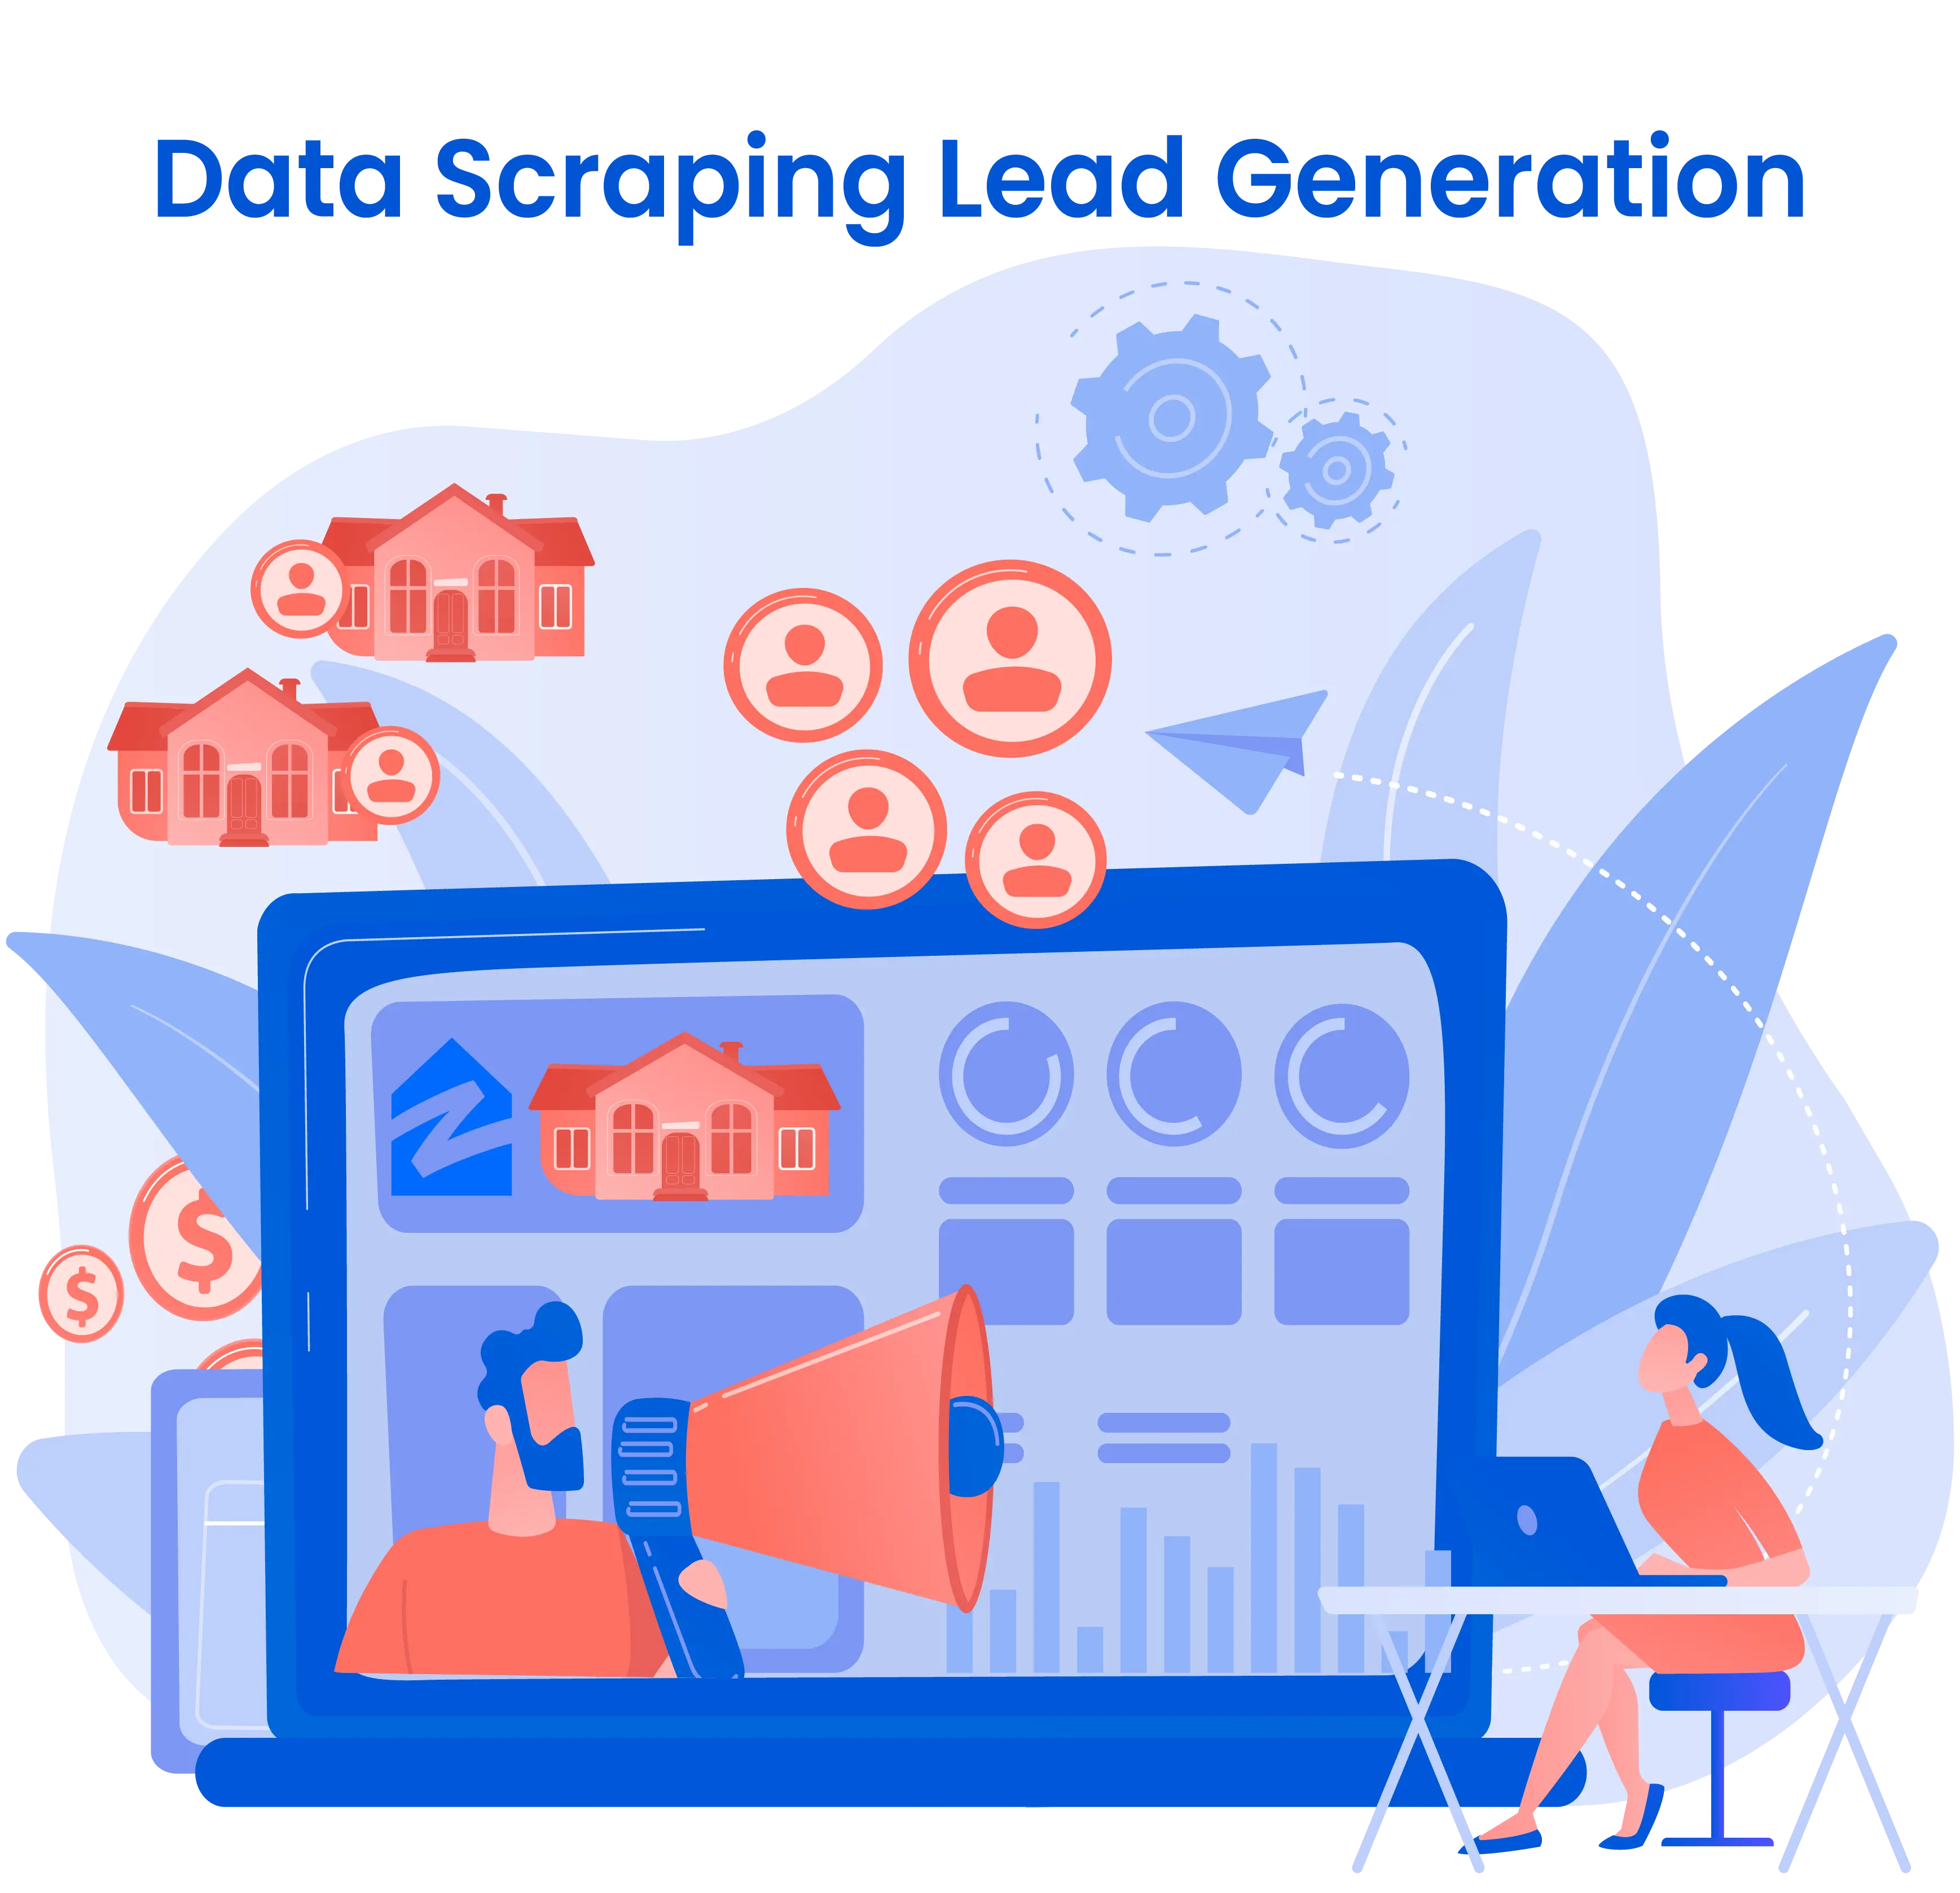 Data Scraping Lead Generation with Scraping Home